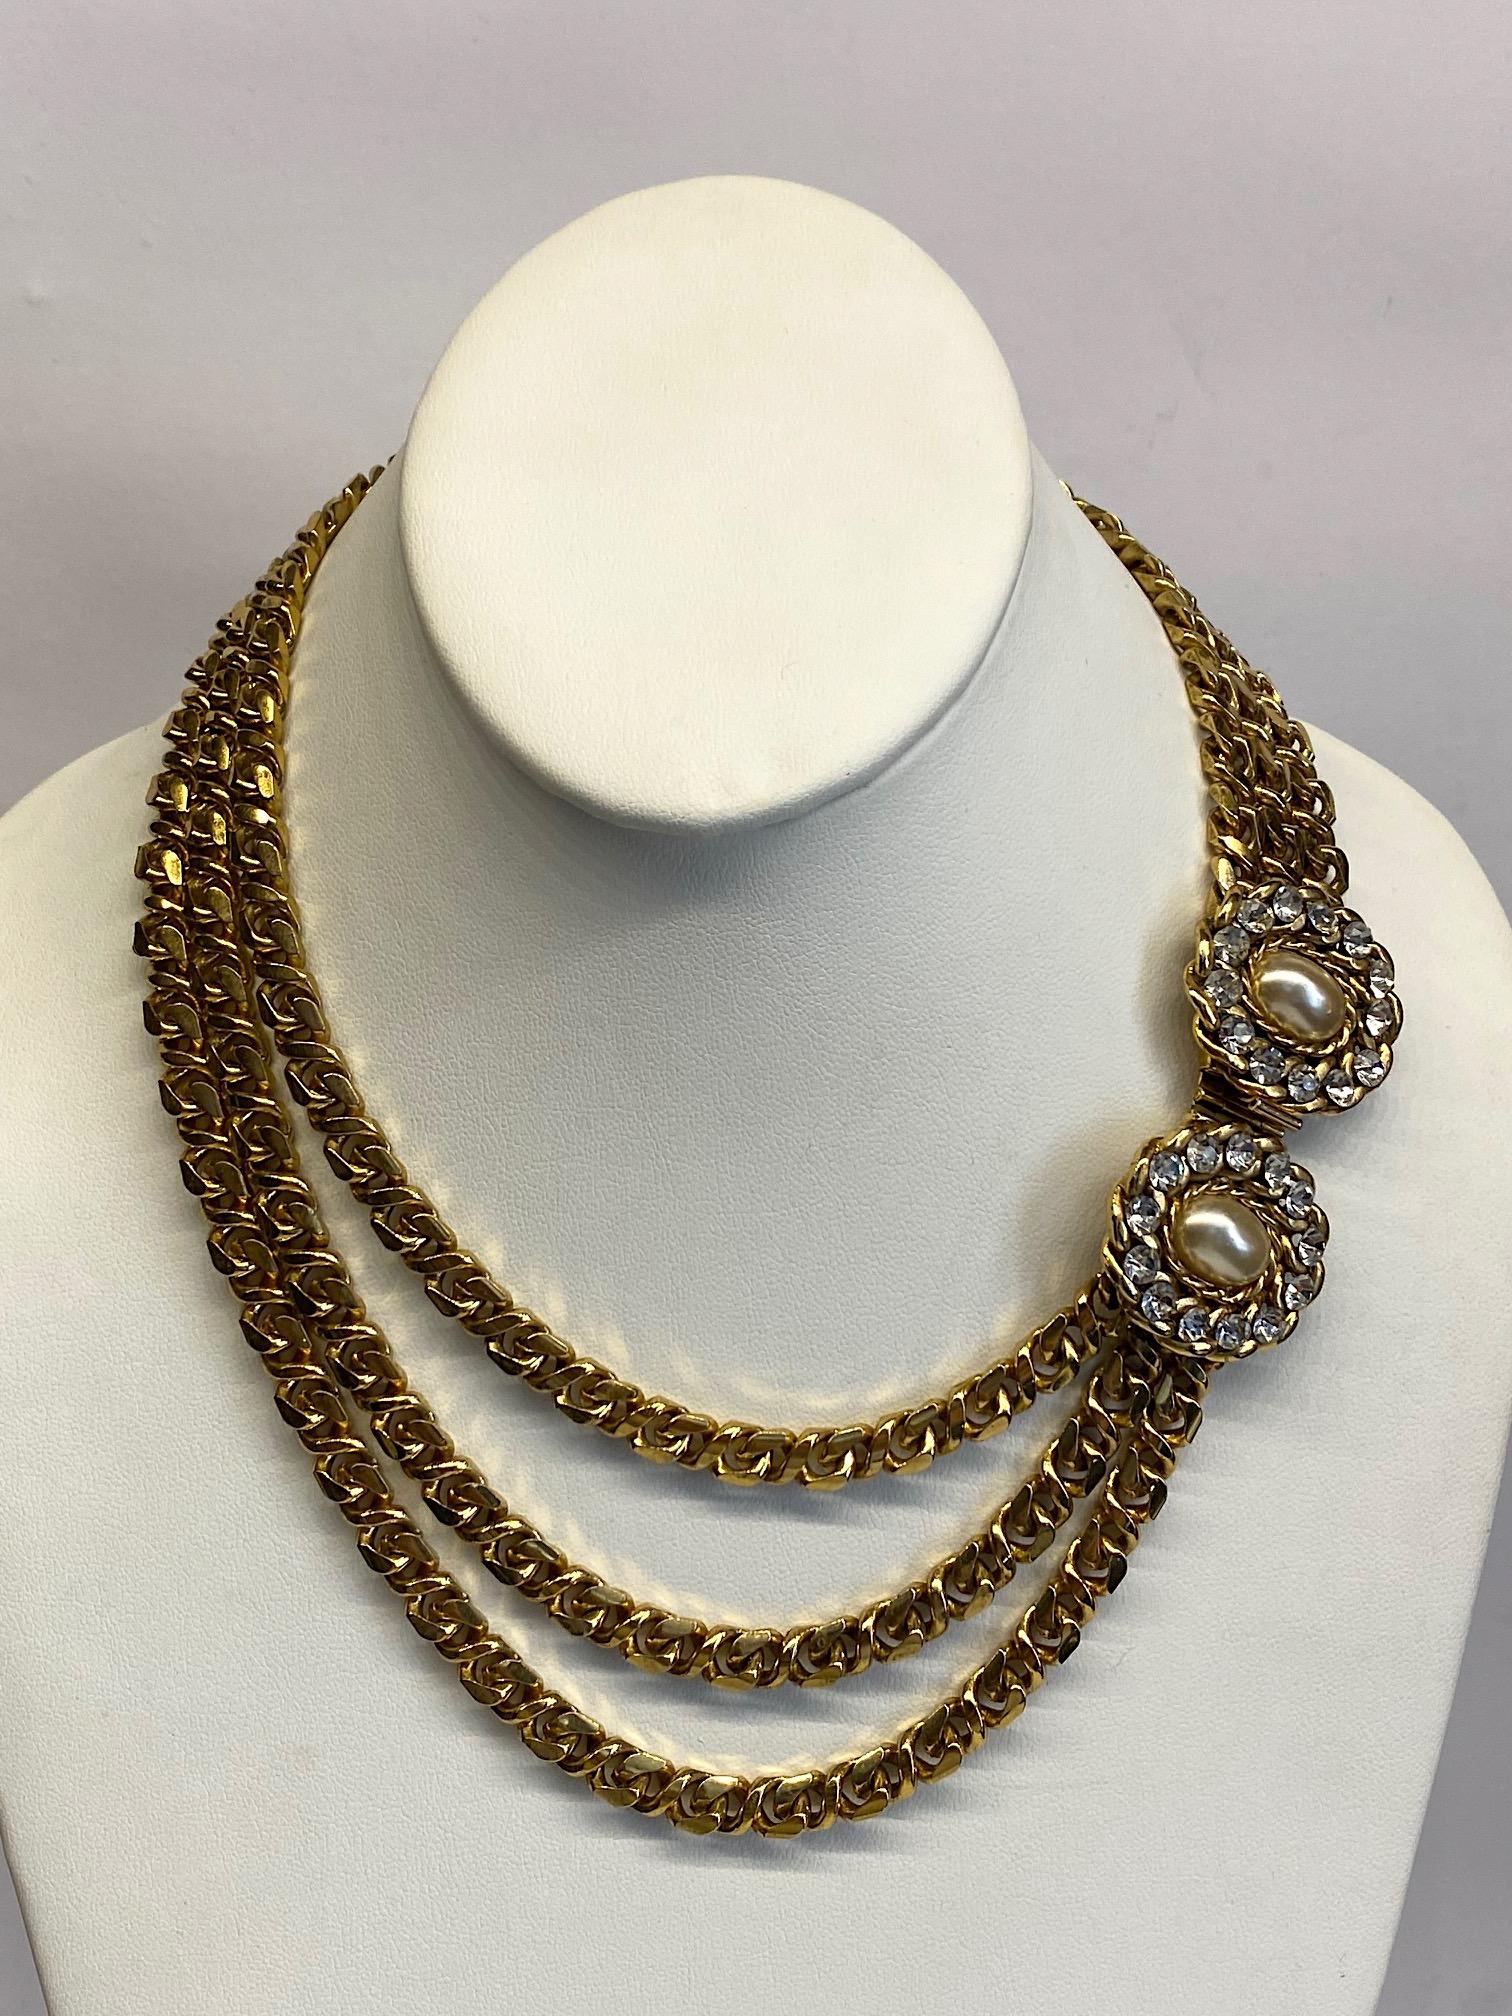 1980s three strand curb link chain necklace with large clasp. Each of the three strands of chain measure .25 on an inch wide and .13 of an inch thick. The large push pin box clasp is comprised of two matching oval medallions 1.13 inches wide and